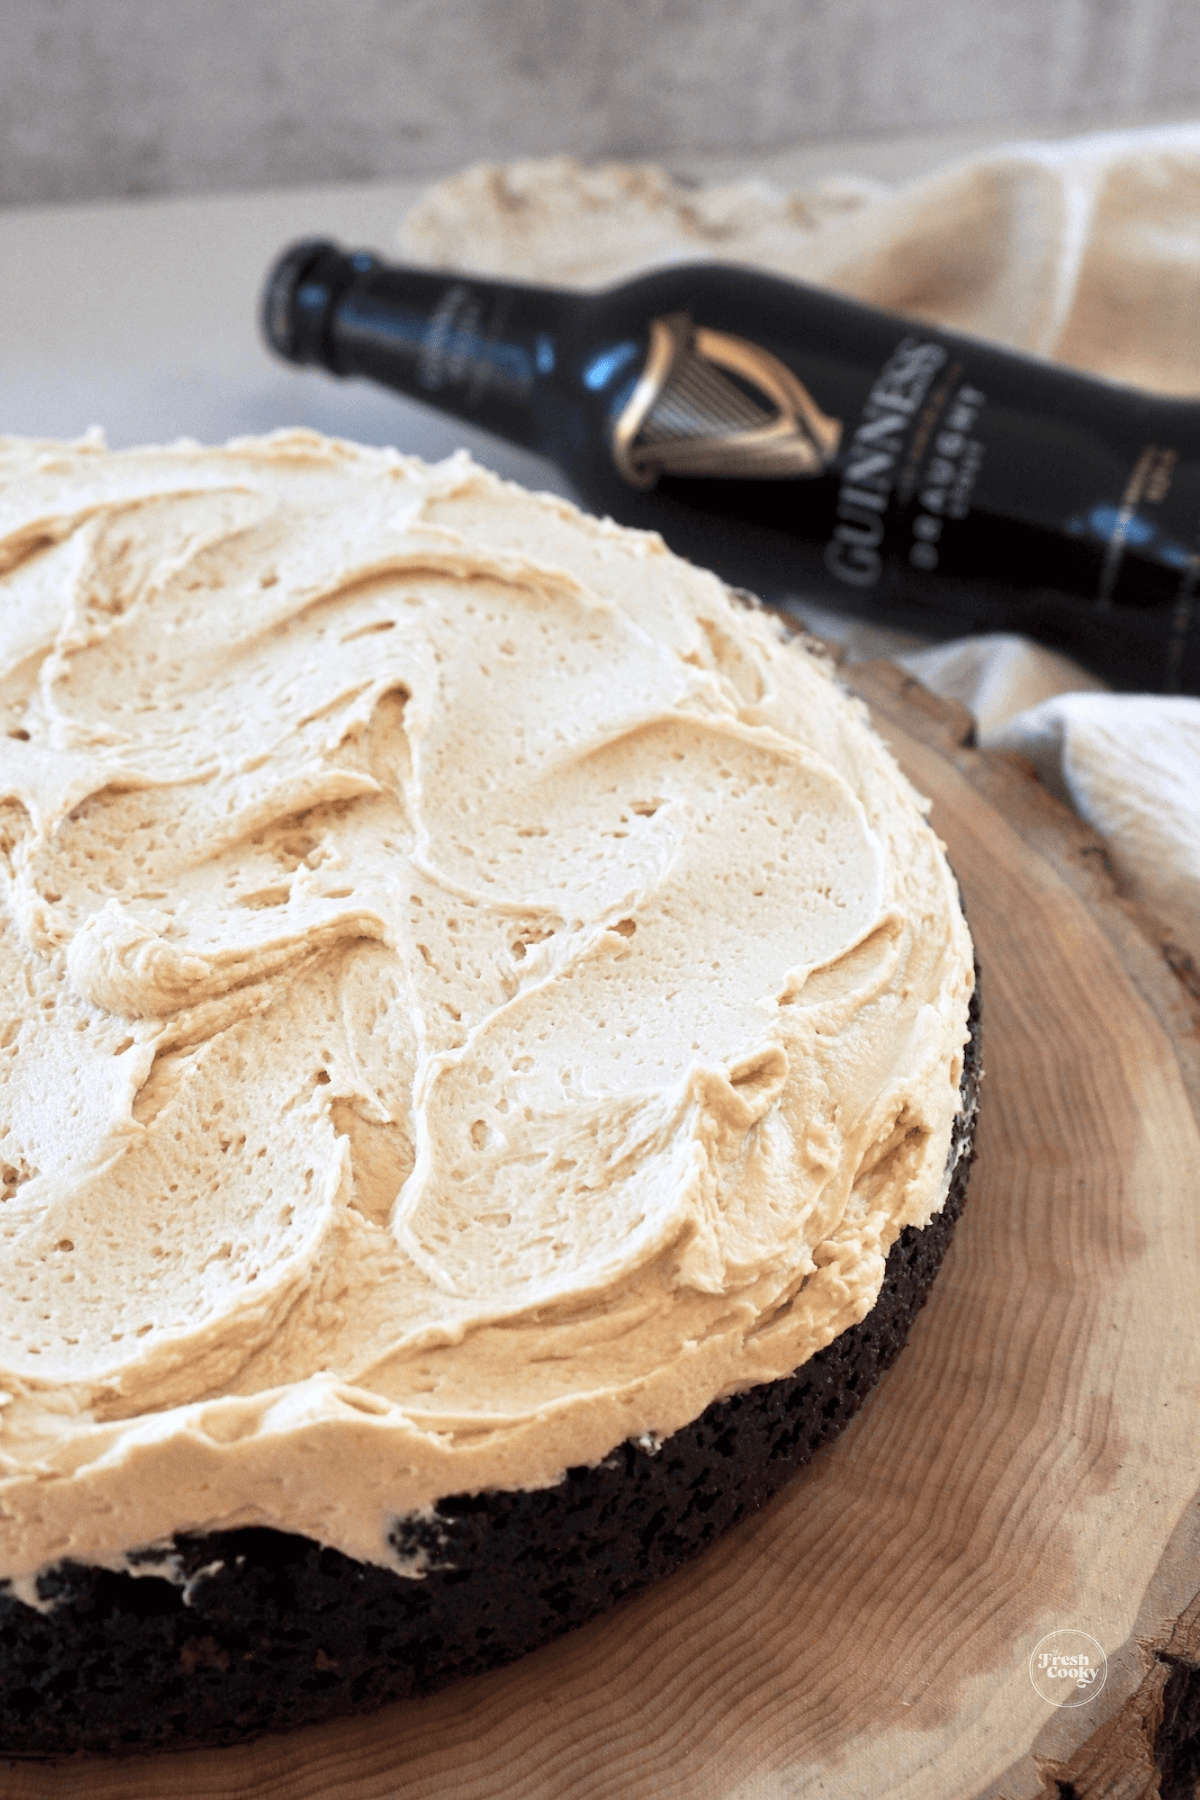 Chocolate Guinness cake frosted with Baileys frosting.